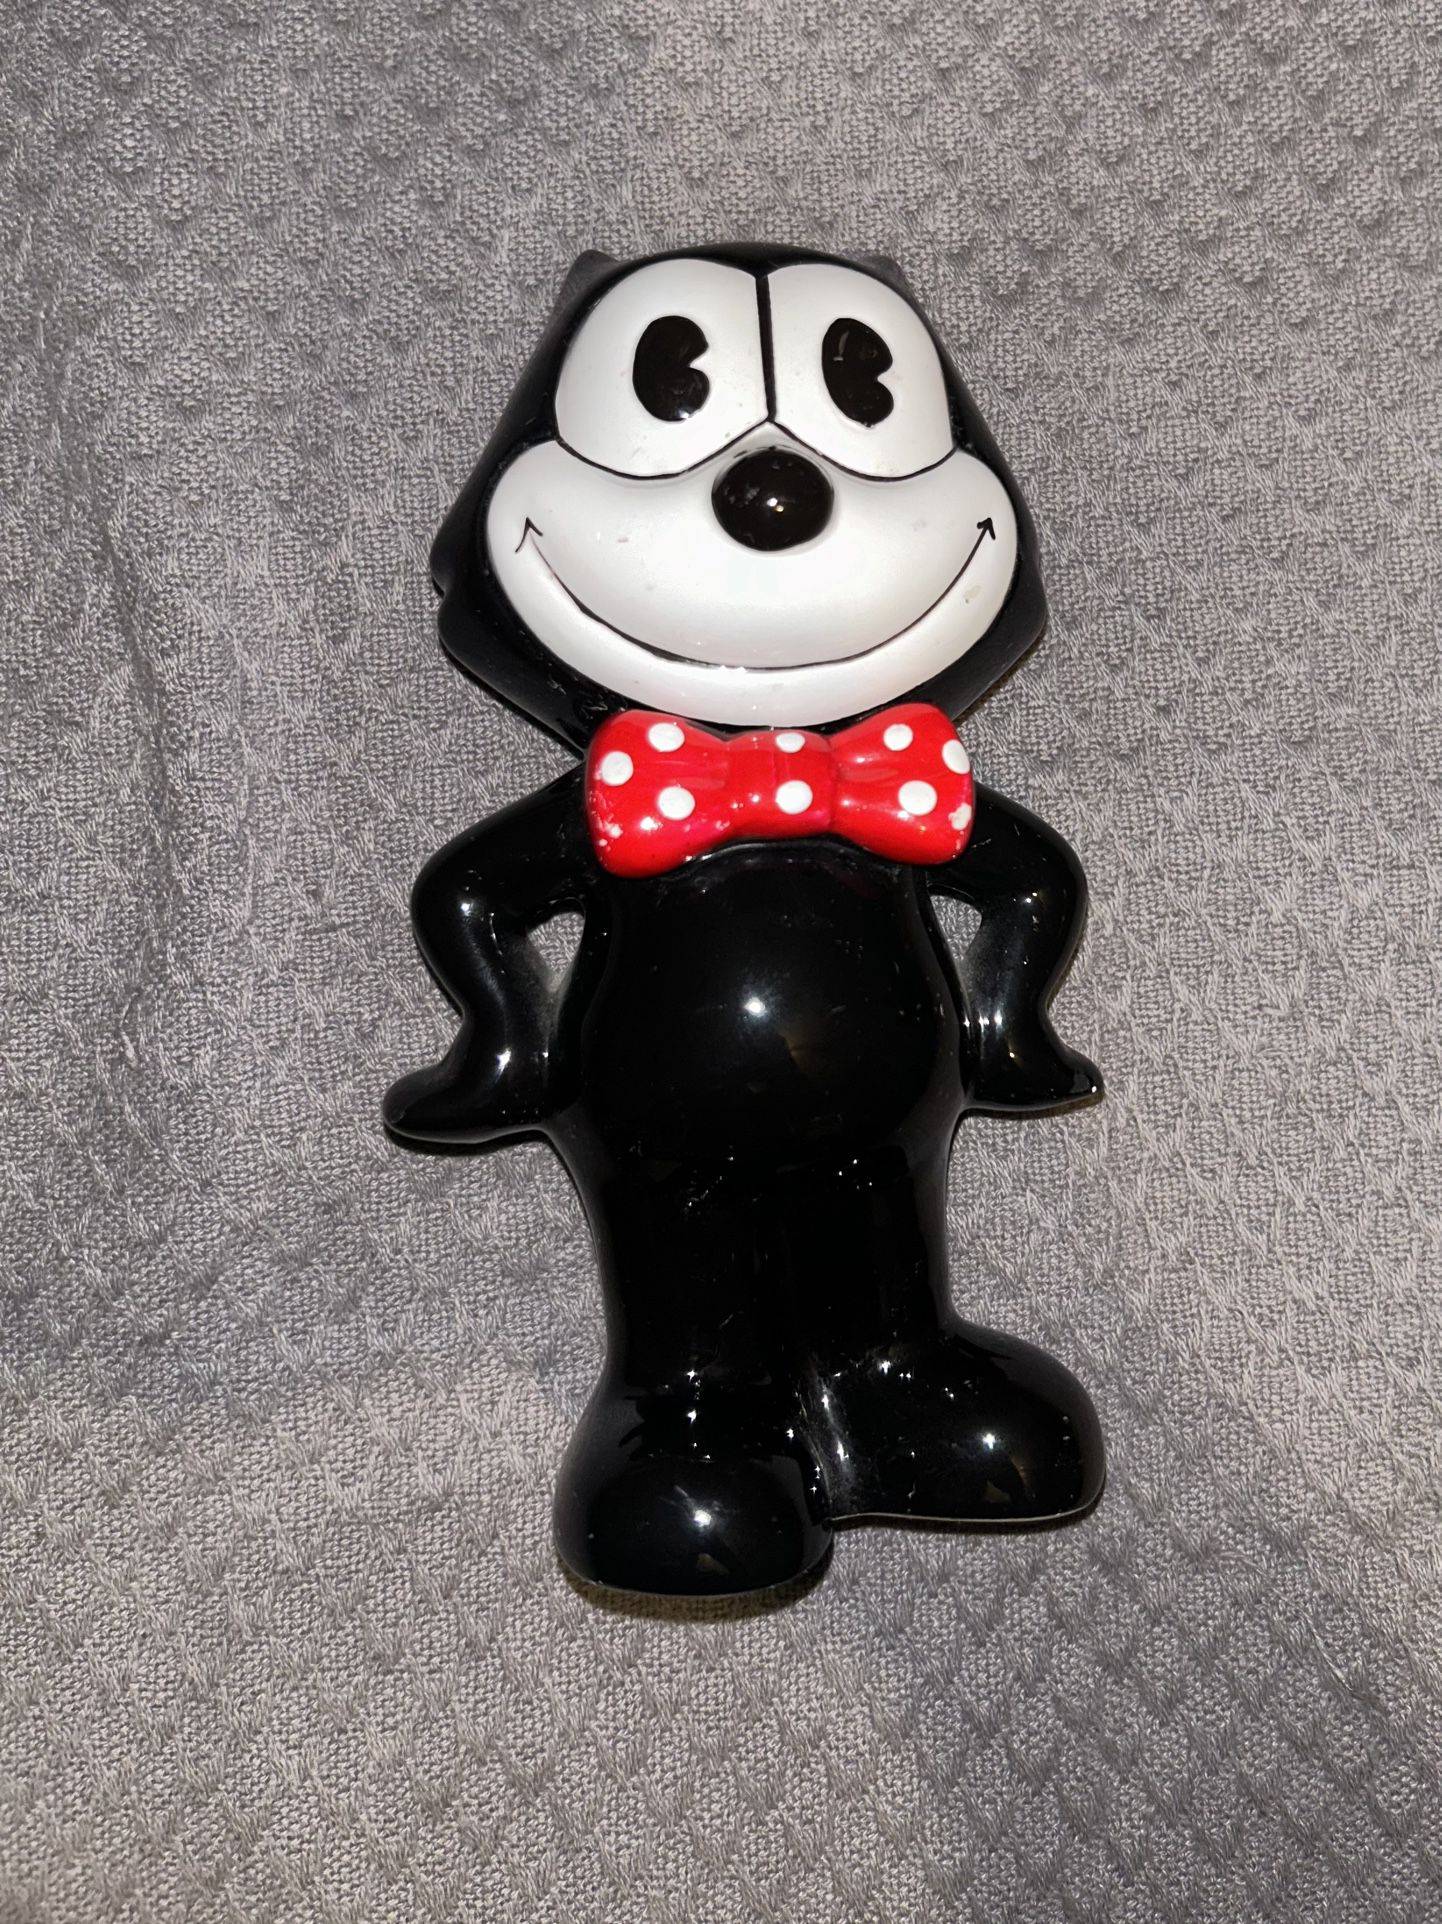 Vintage Ceramic Felix the Cat Bank Applause 1989 Figural Coin Bank Orig Rubber Stopper 7" Red & White Polkadot Bow Tie Iconic Cartoon EUC